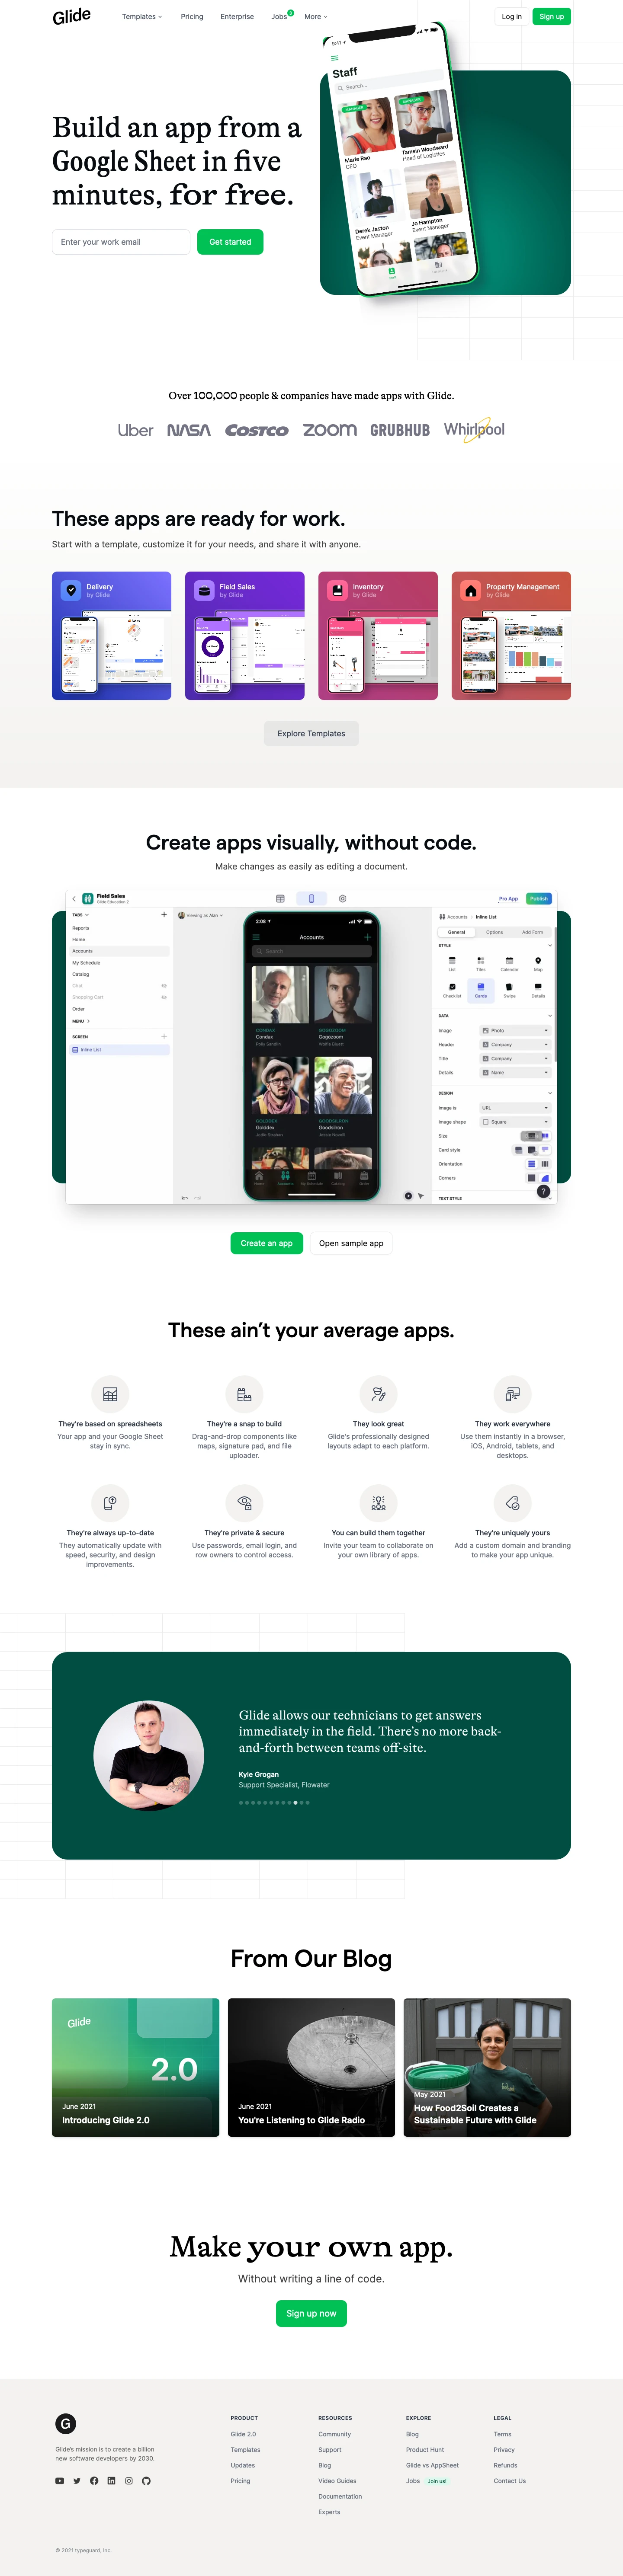 Glide Landing Page Example: Glide turns spreadsheets into beautiful, easy-to-use apps, without code. Pick a spreadsheet or start with a template, customize your app, then share it instantly with anyone. Start today for free!